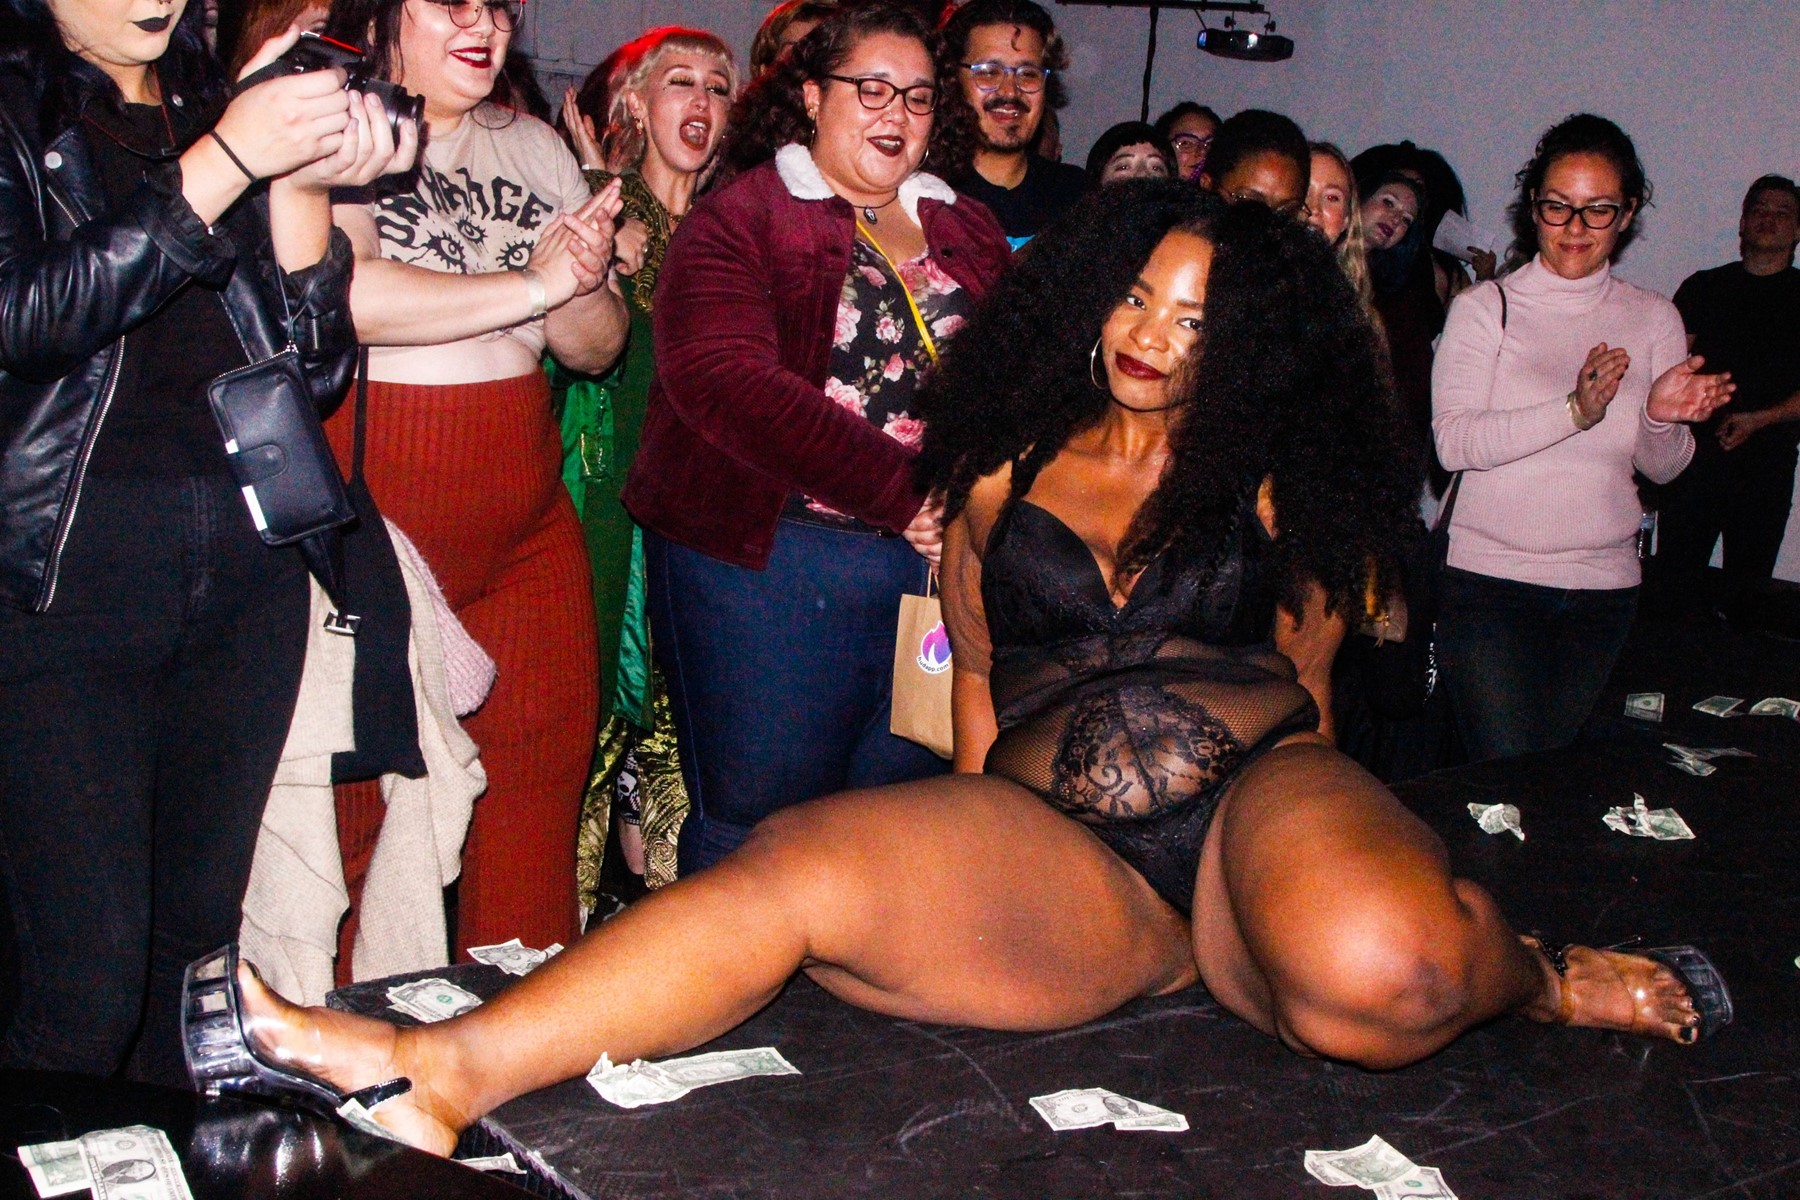 The body positive LA strip show founded by plus size women Dazed image picture pic